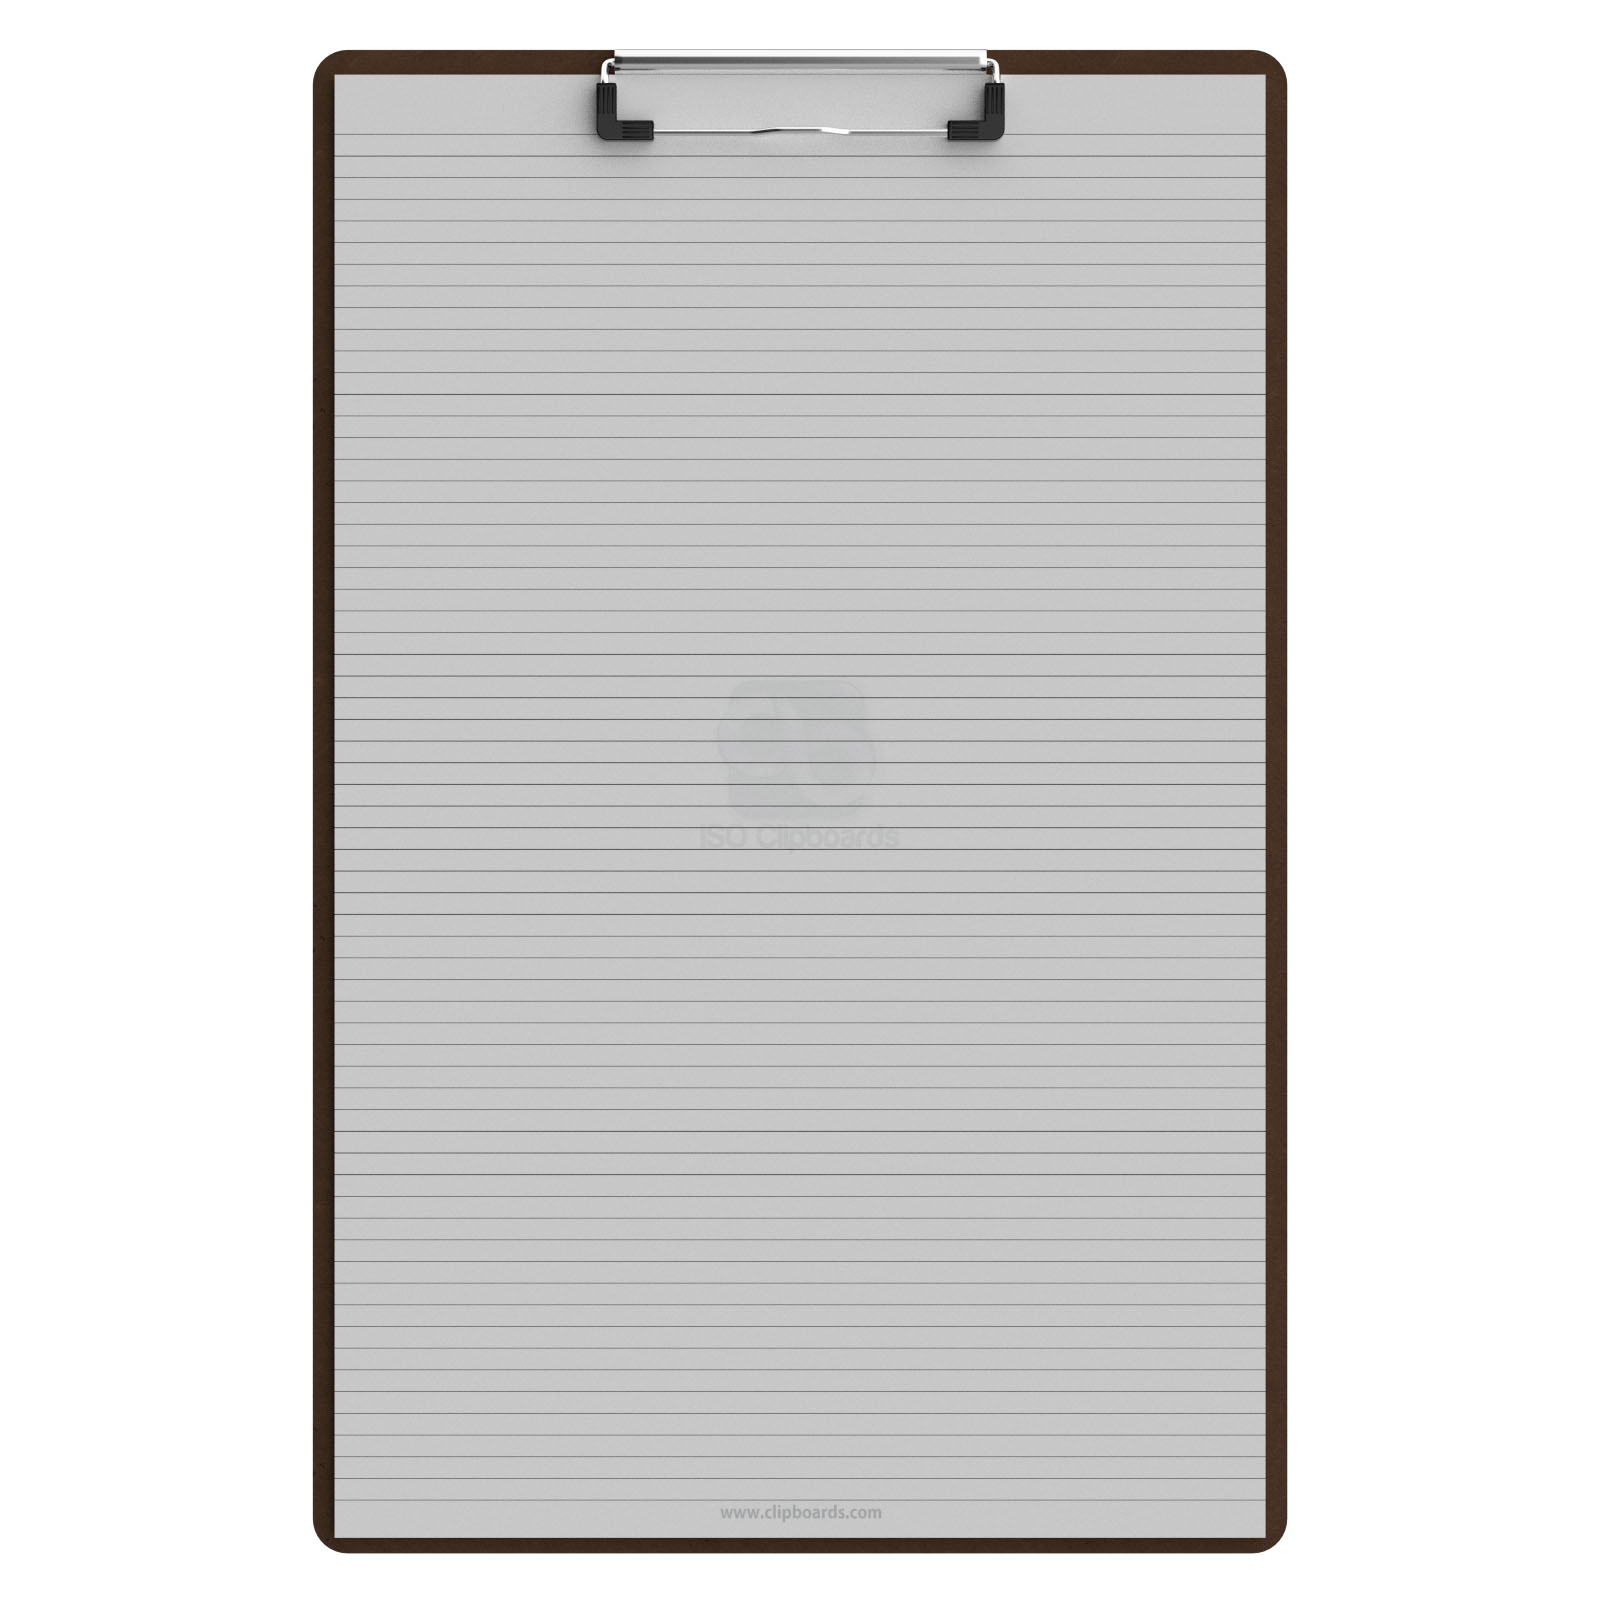 Paper Merlin Ledger Clipboard - MDF 11x17 Clipboard with Large Clip Extra  Writing Space 